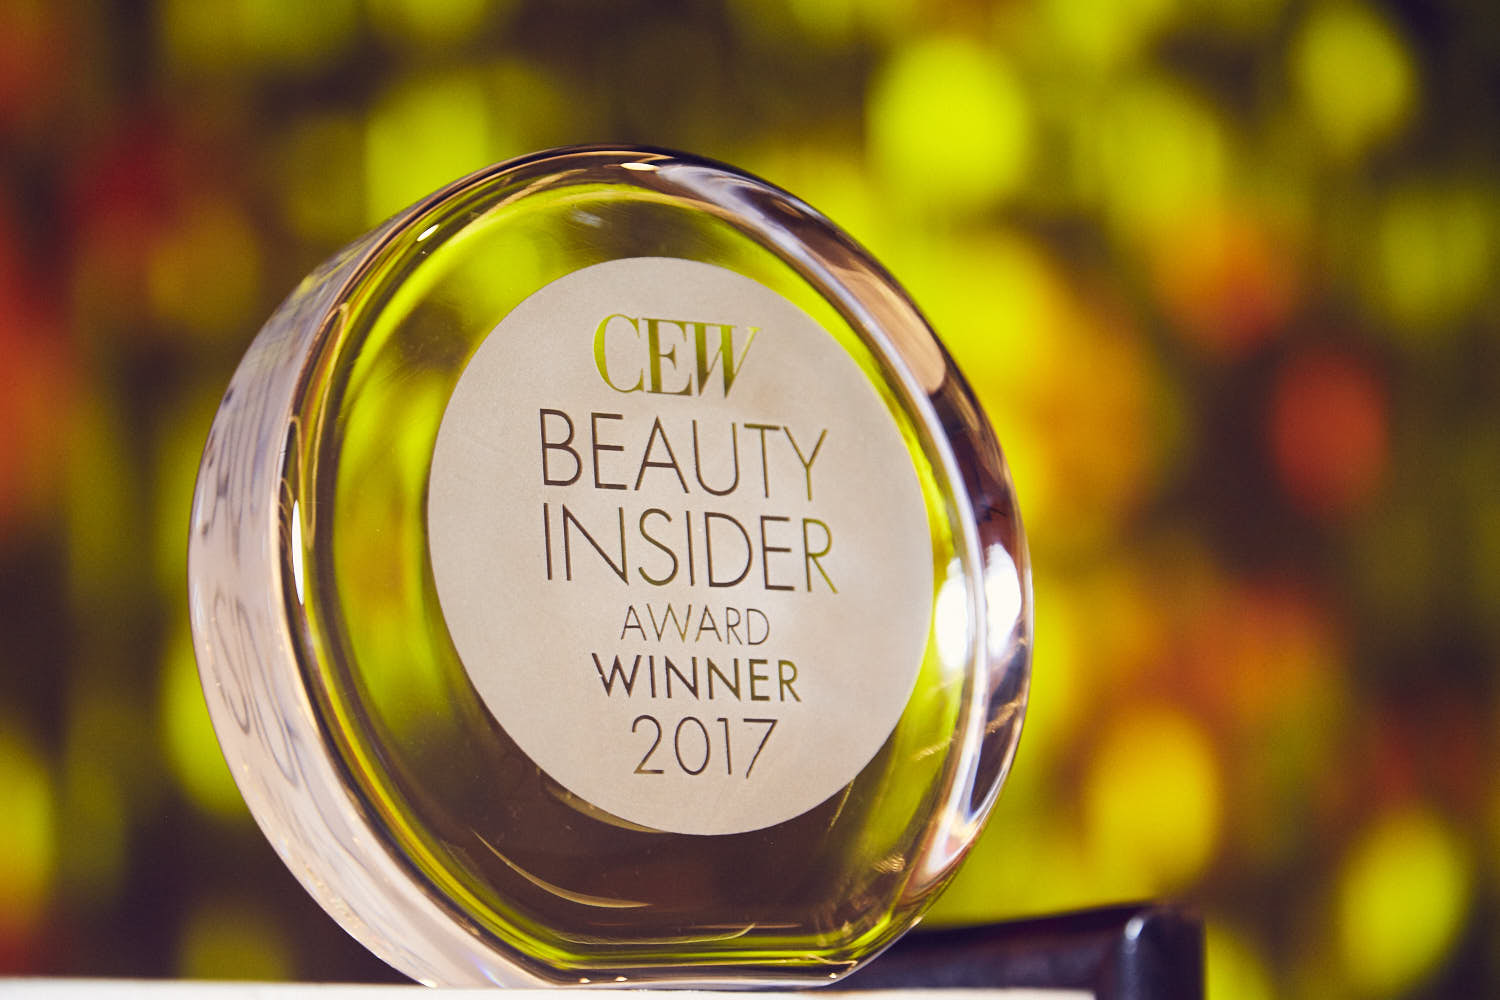 Review, Trends 2017, 2018: 23rd Annual CEW Insiders’ Choice Beauty Awards, Best Makeup, Cosmetics, Skincare, Fragrance Products